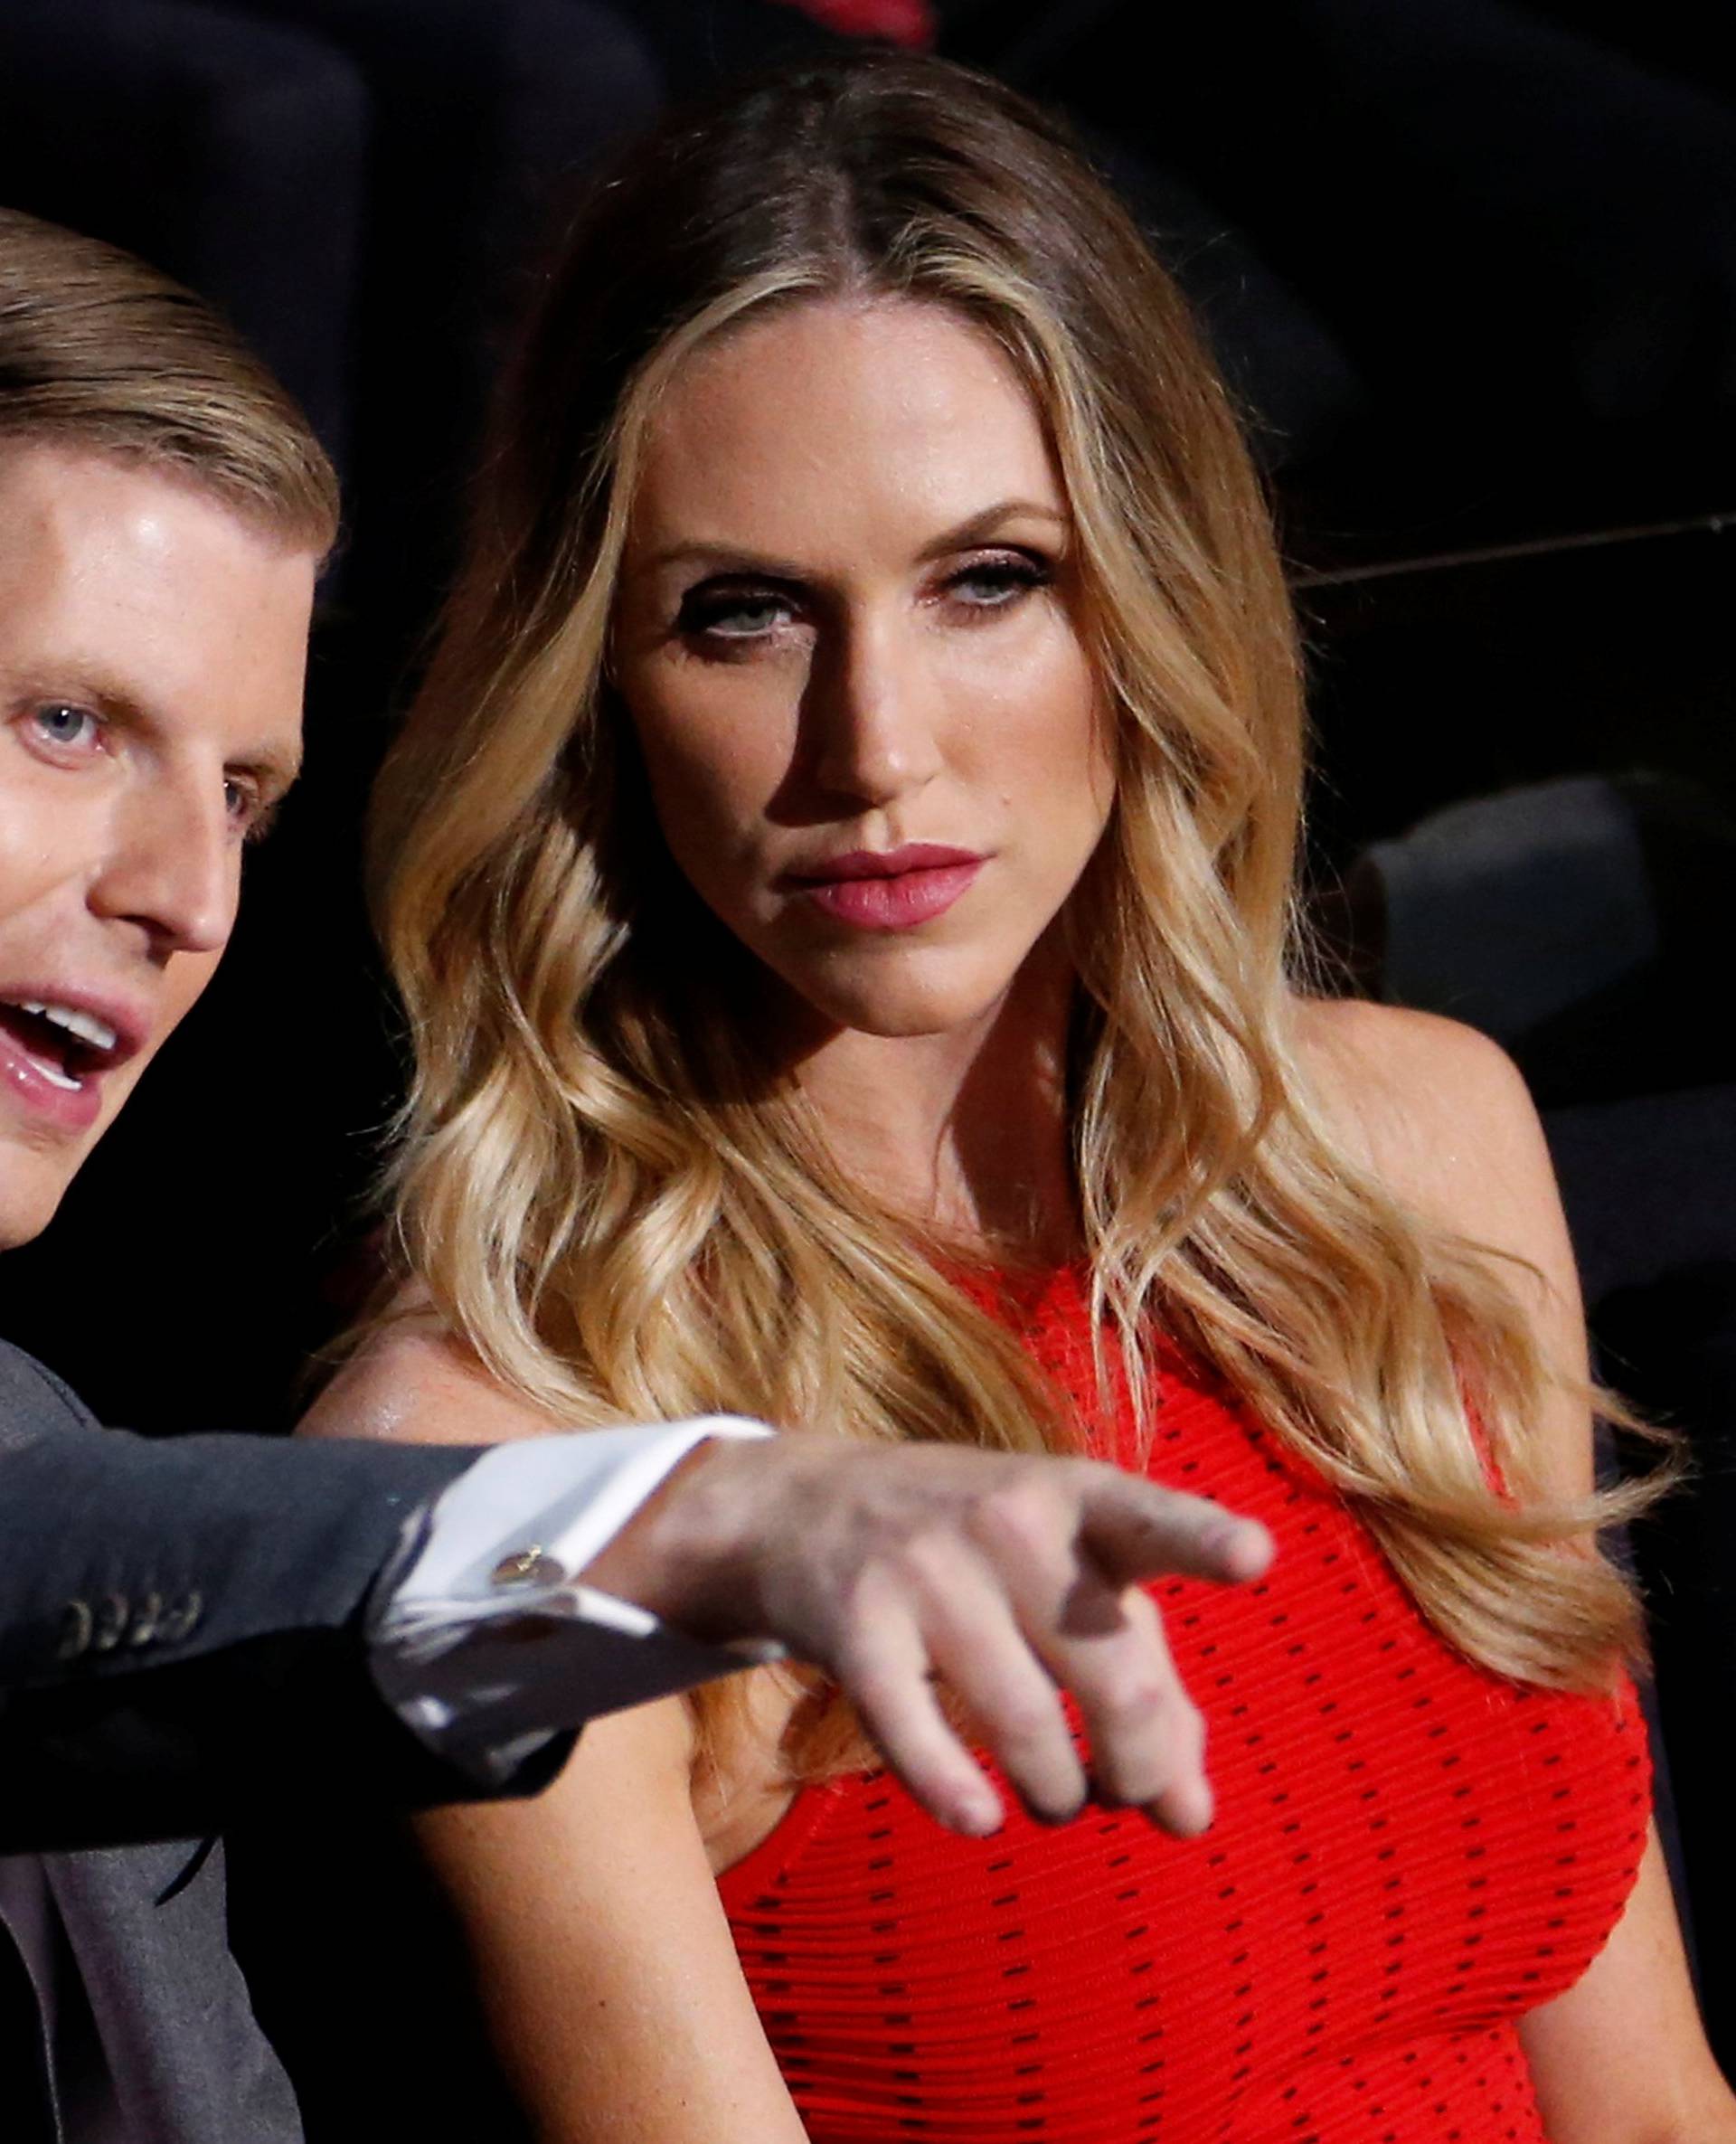 FILE PHOTO: Donald Trump's son Eric Trump and his wife Lara Yunaska watch the proceedings during the third day of the Republican National Convention in Cleveland, Ohio